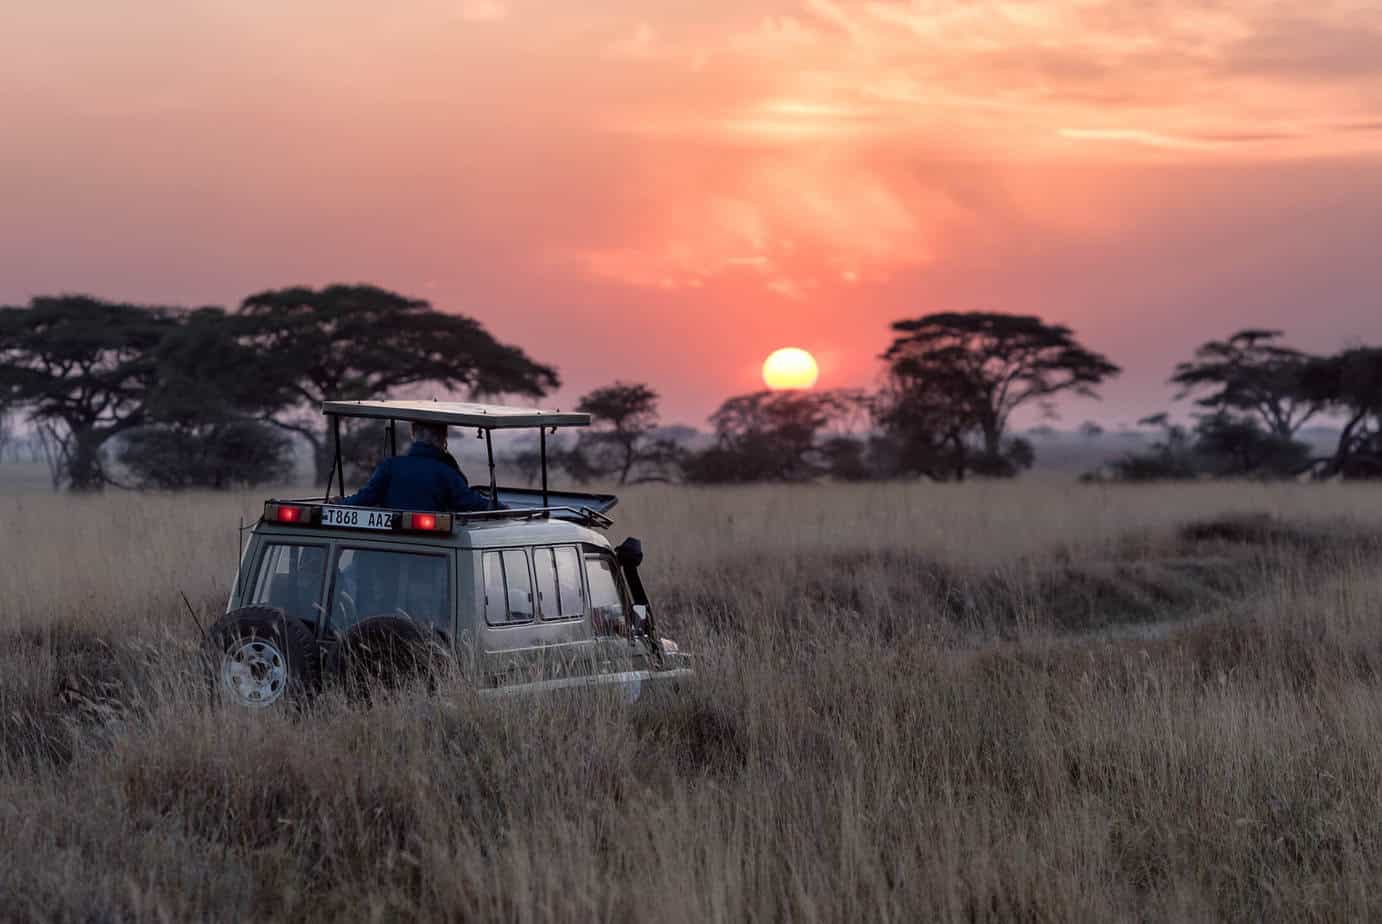 Jeep driving through the African Bush at sunset, Africa